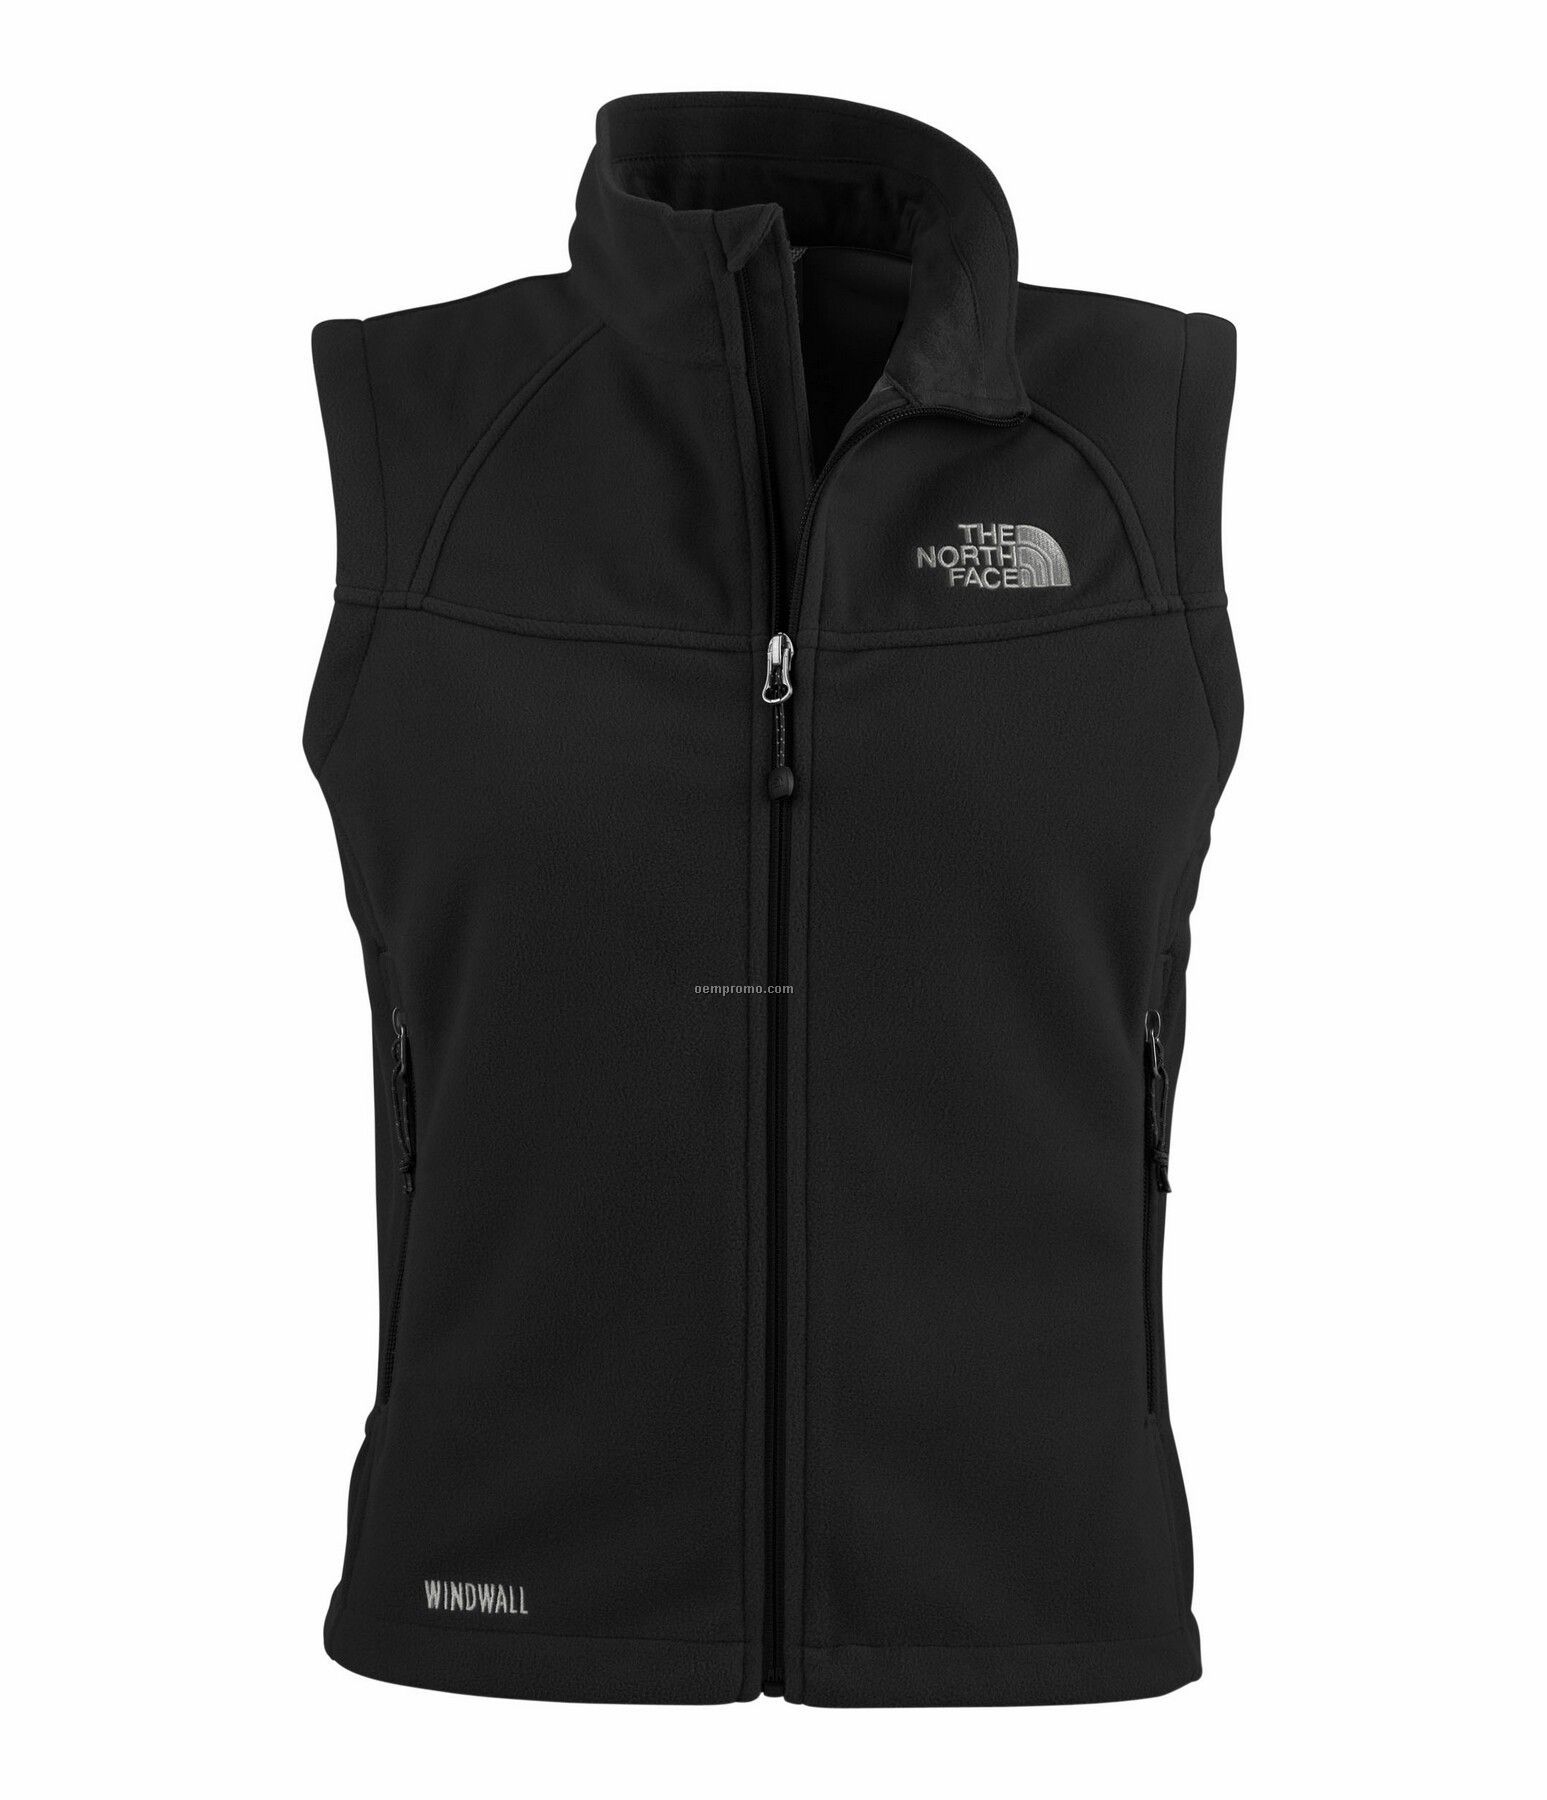 The North Face Women's Windwall 1 Vest